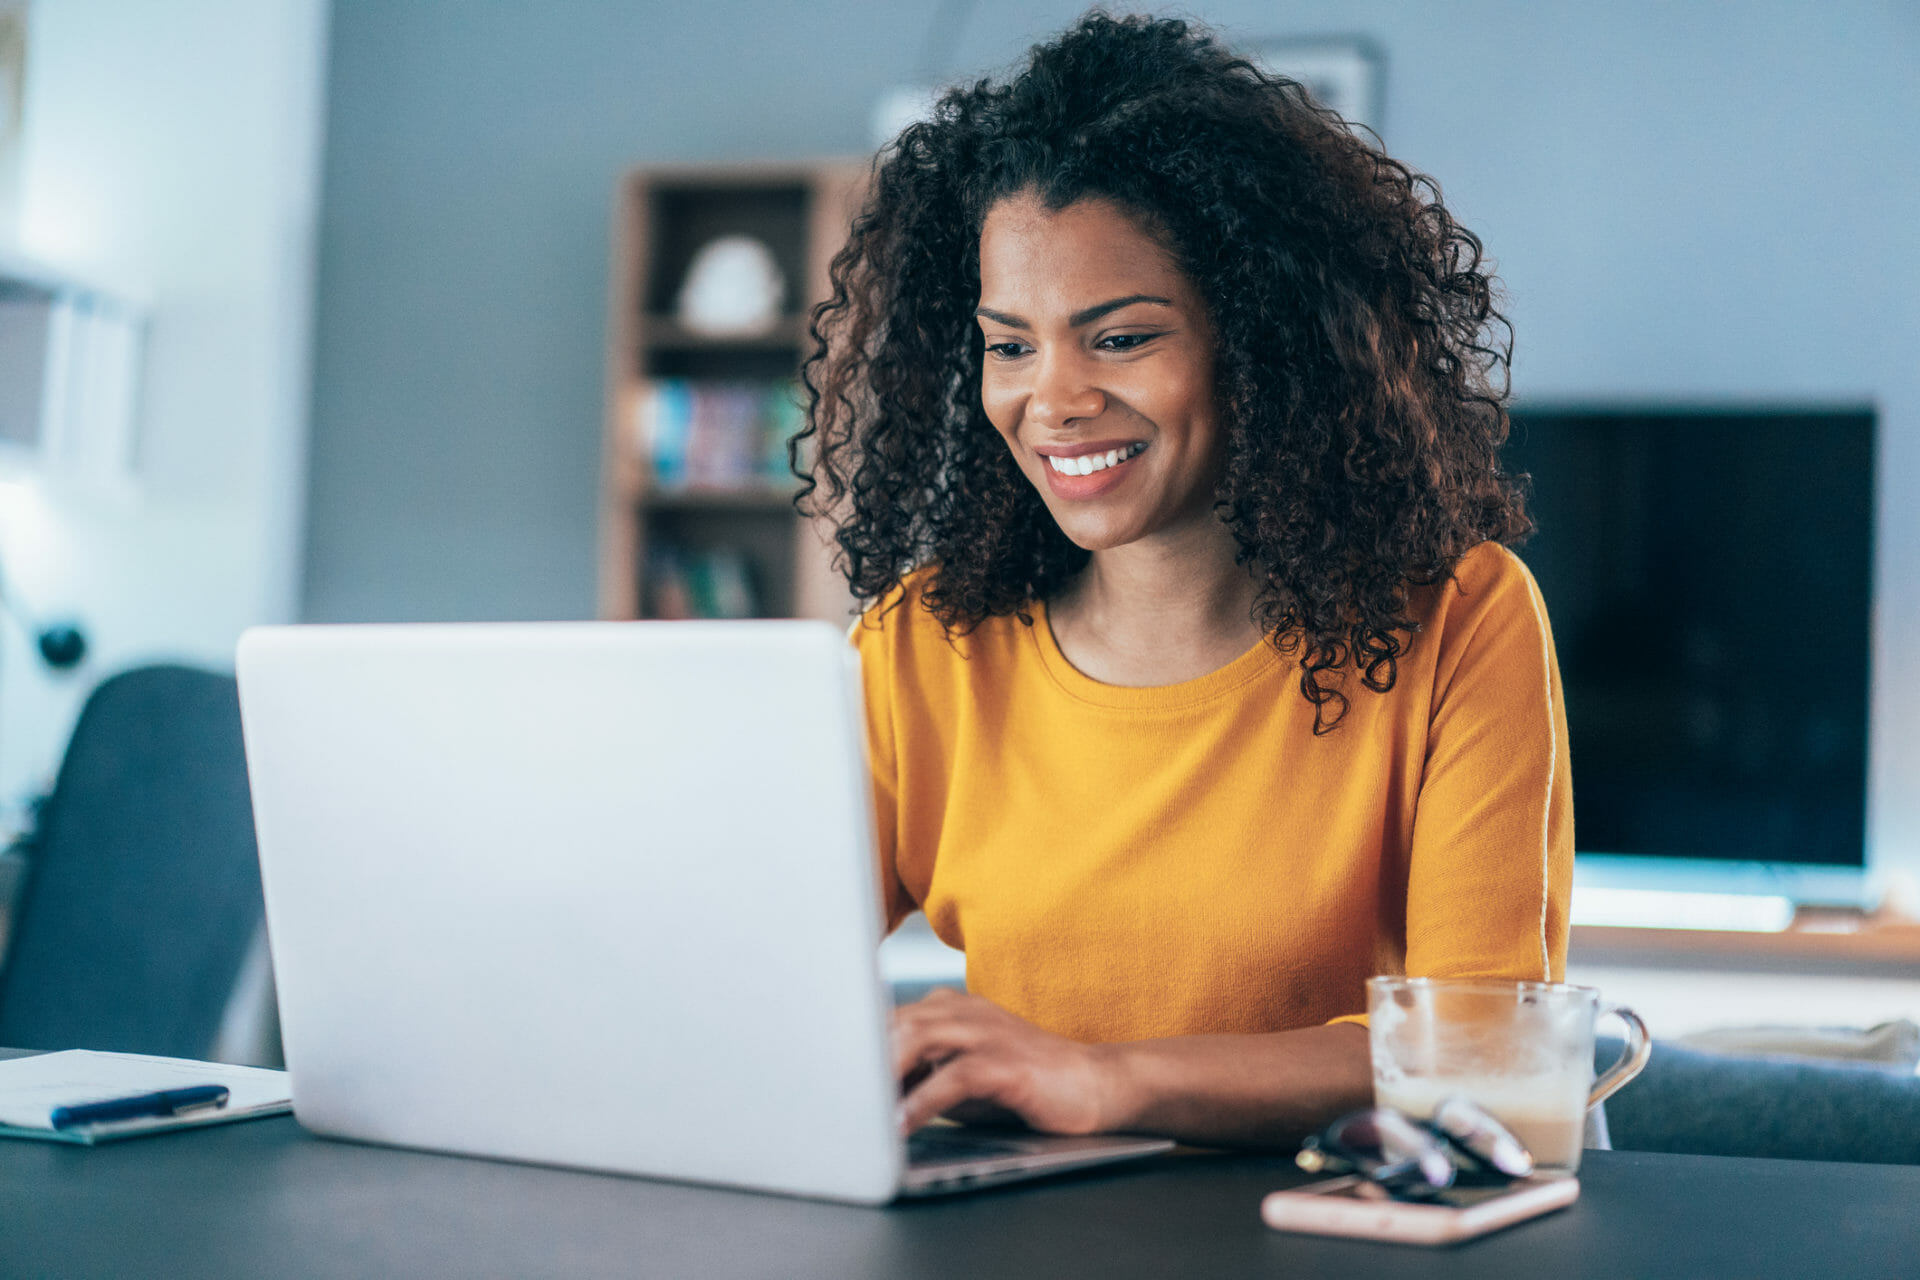 Woman with curly hair smiling on a laptop